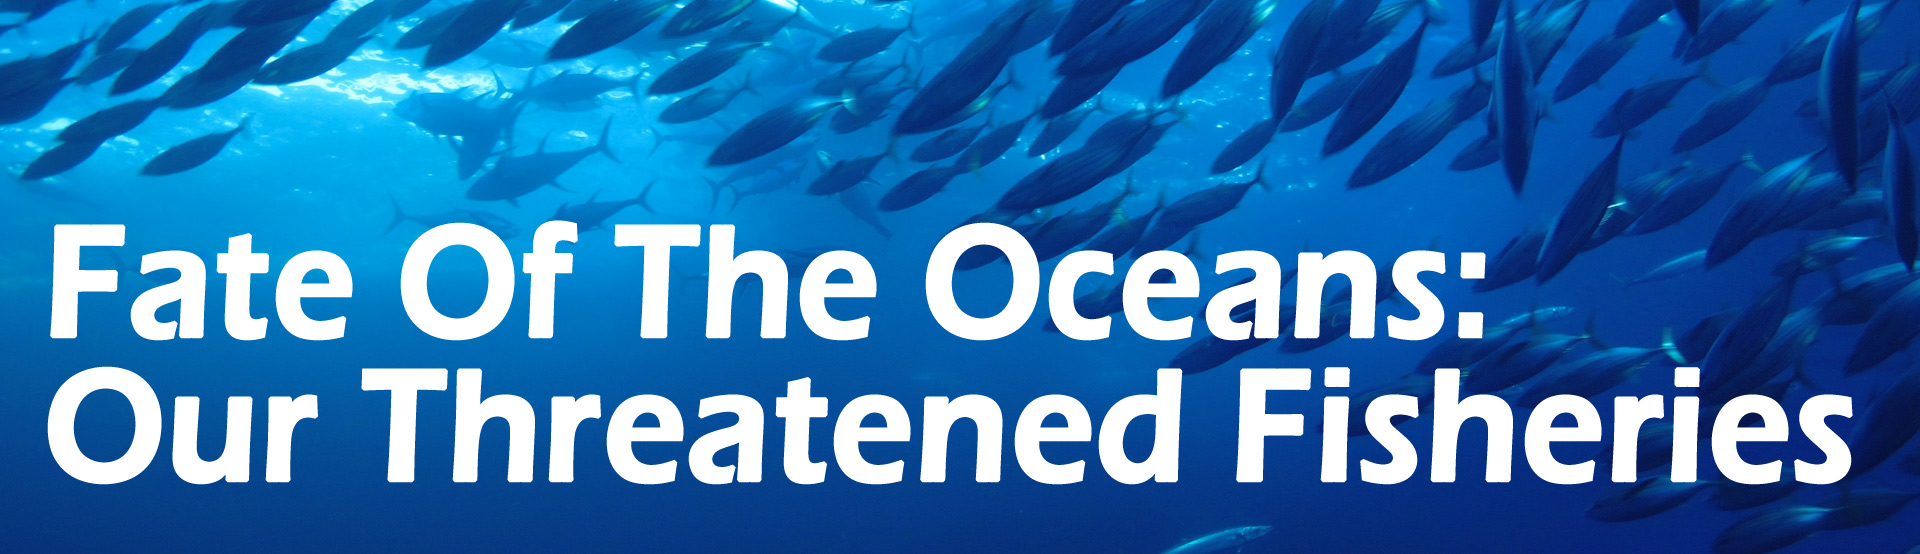 Fate Of The Oceans: Our Threatened Fisheries